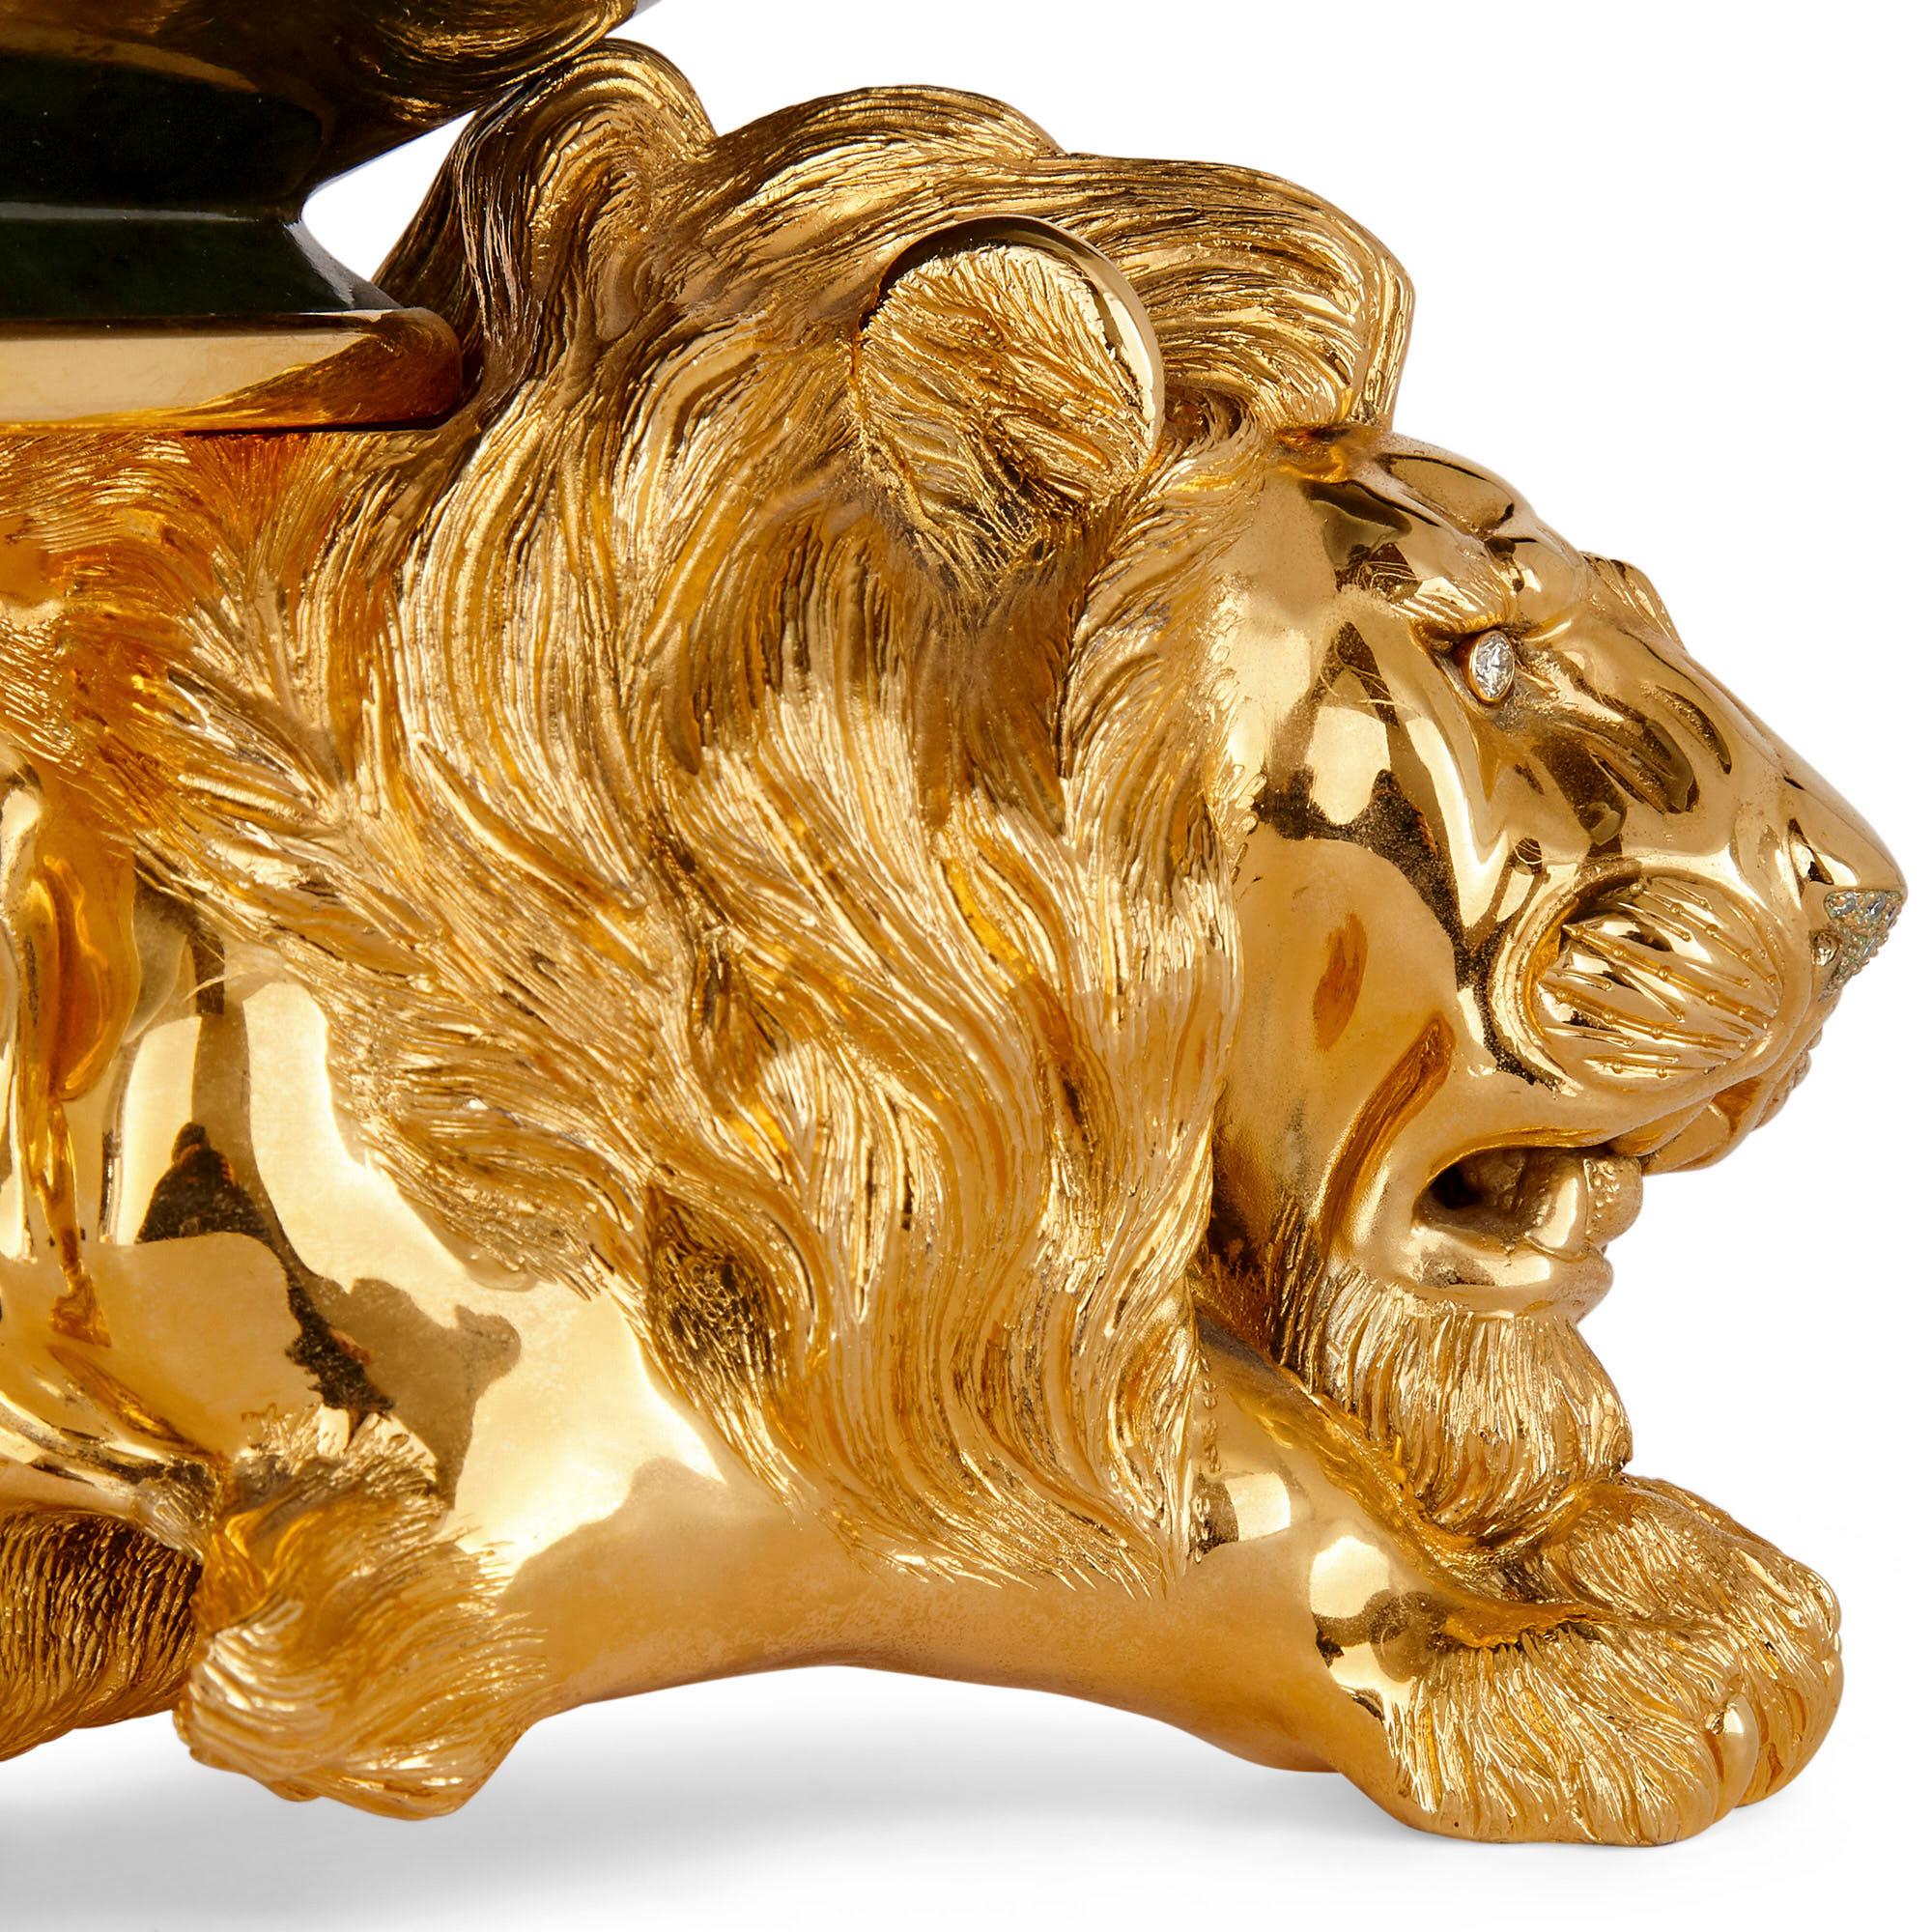 20th Century Silver-Gilt and Nephrite Crouching Lion Decorative Bowl For Sale 1